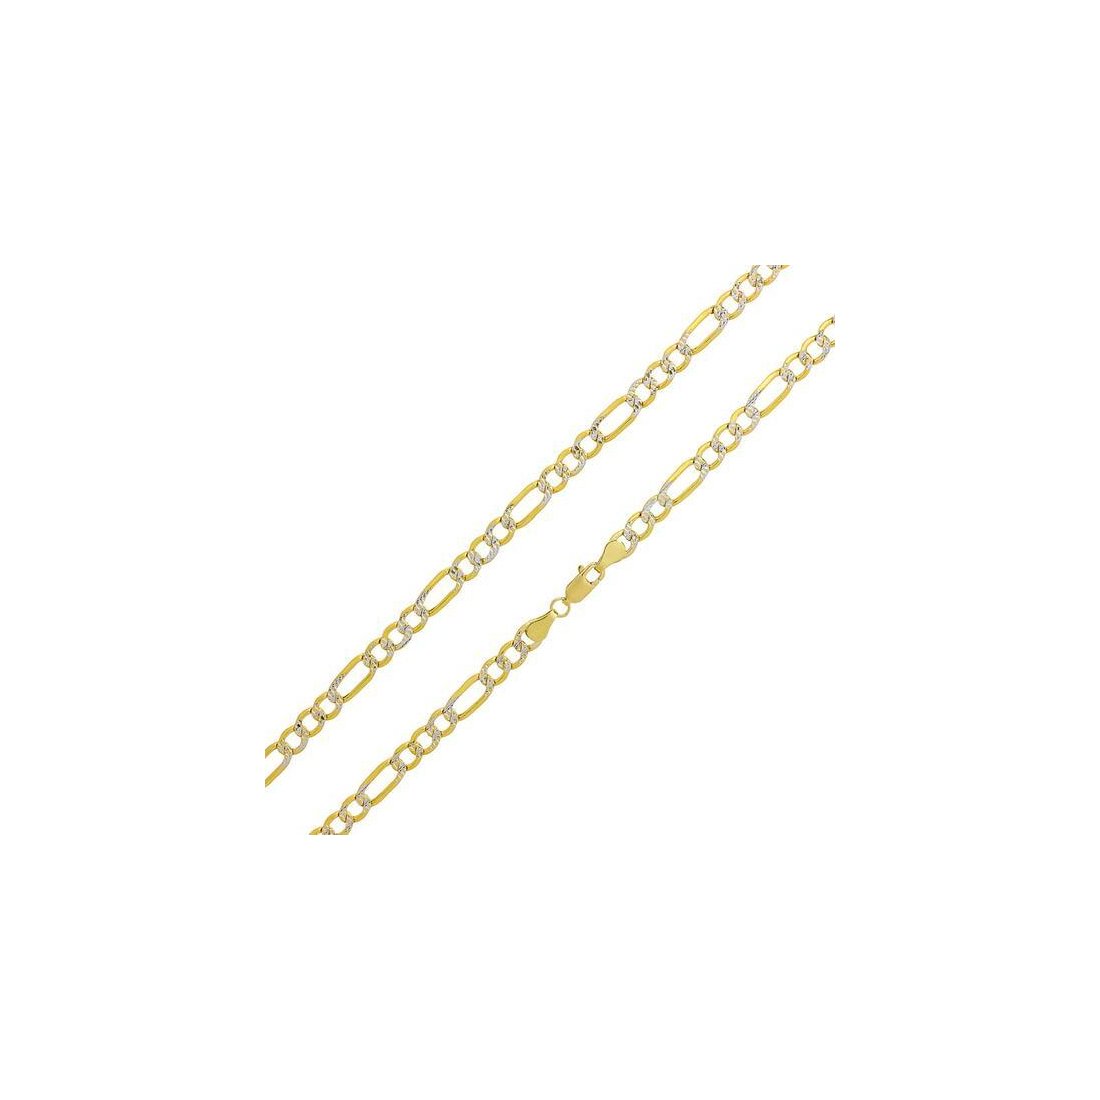 10MM Pave Figaro Yellow Gold Chain .925 Sterling Silver Length 8"-32" Inches